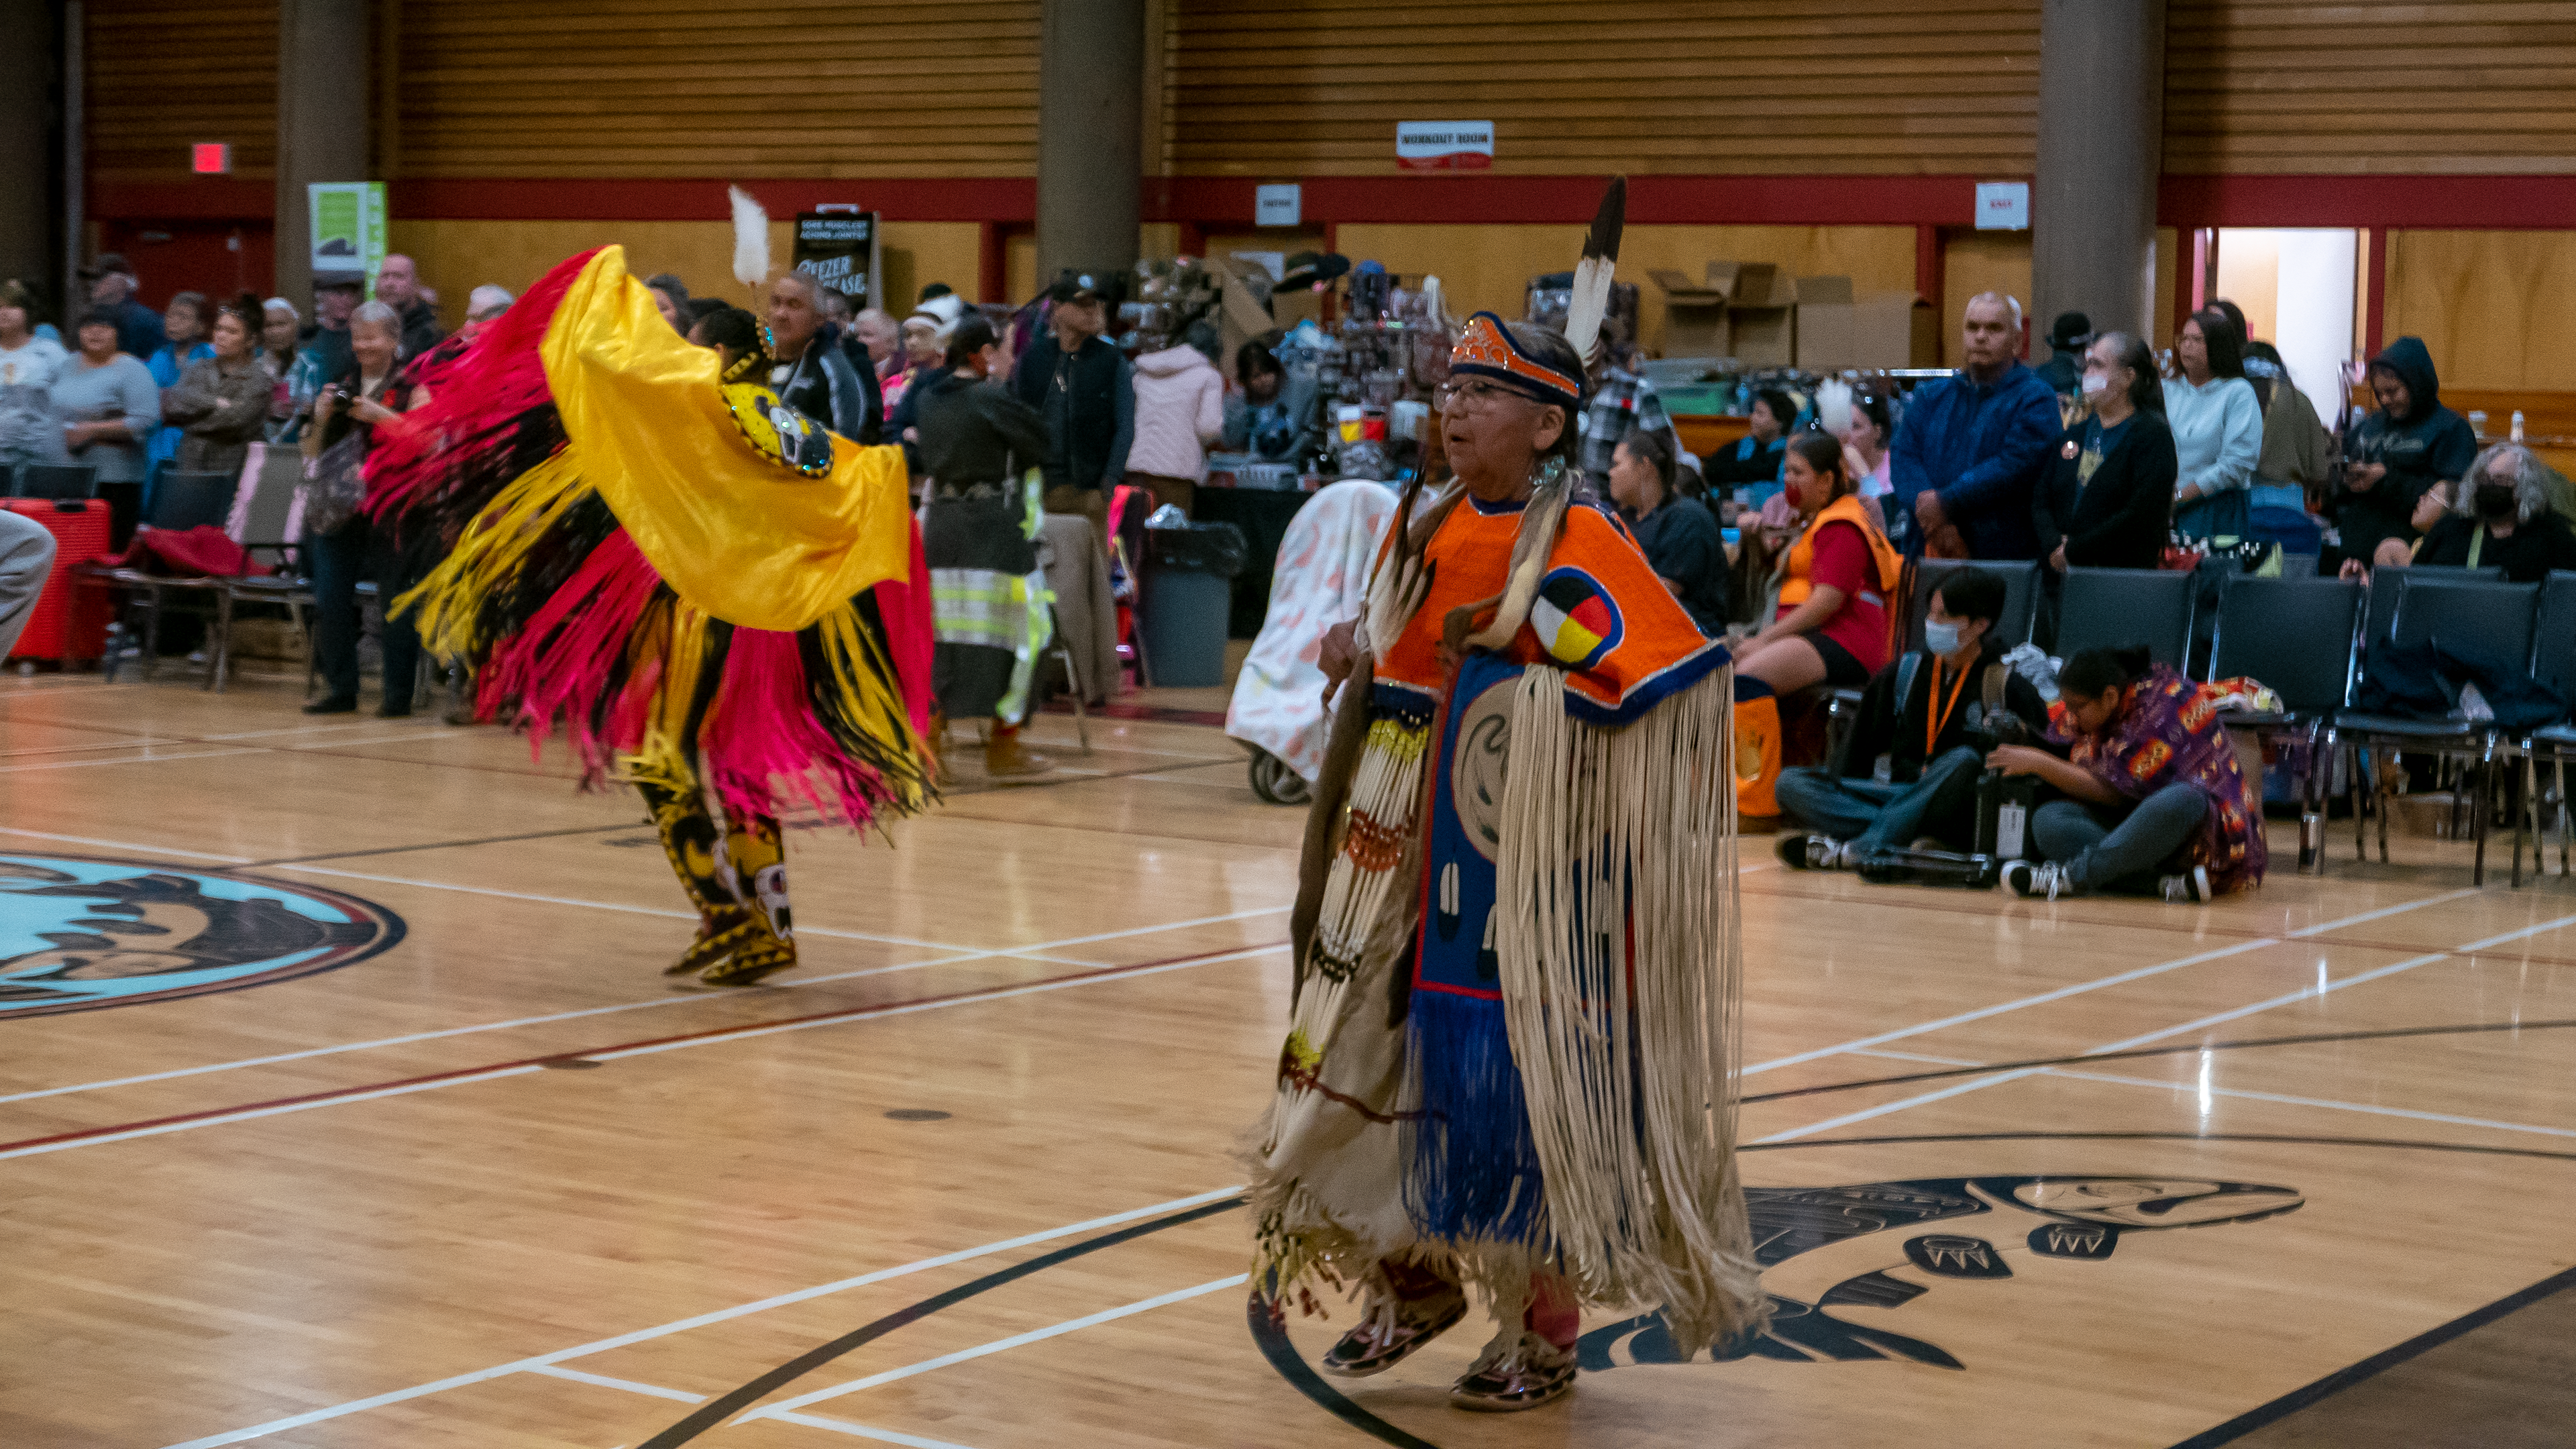 A woman in an orange powwow dress dances inside a crowded community centre. Another powwow dancer spins behind her.